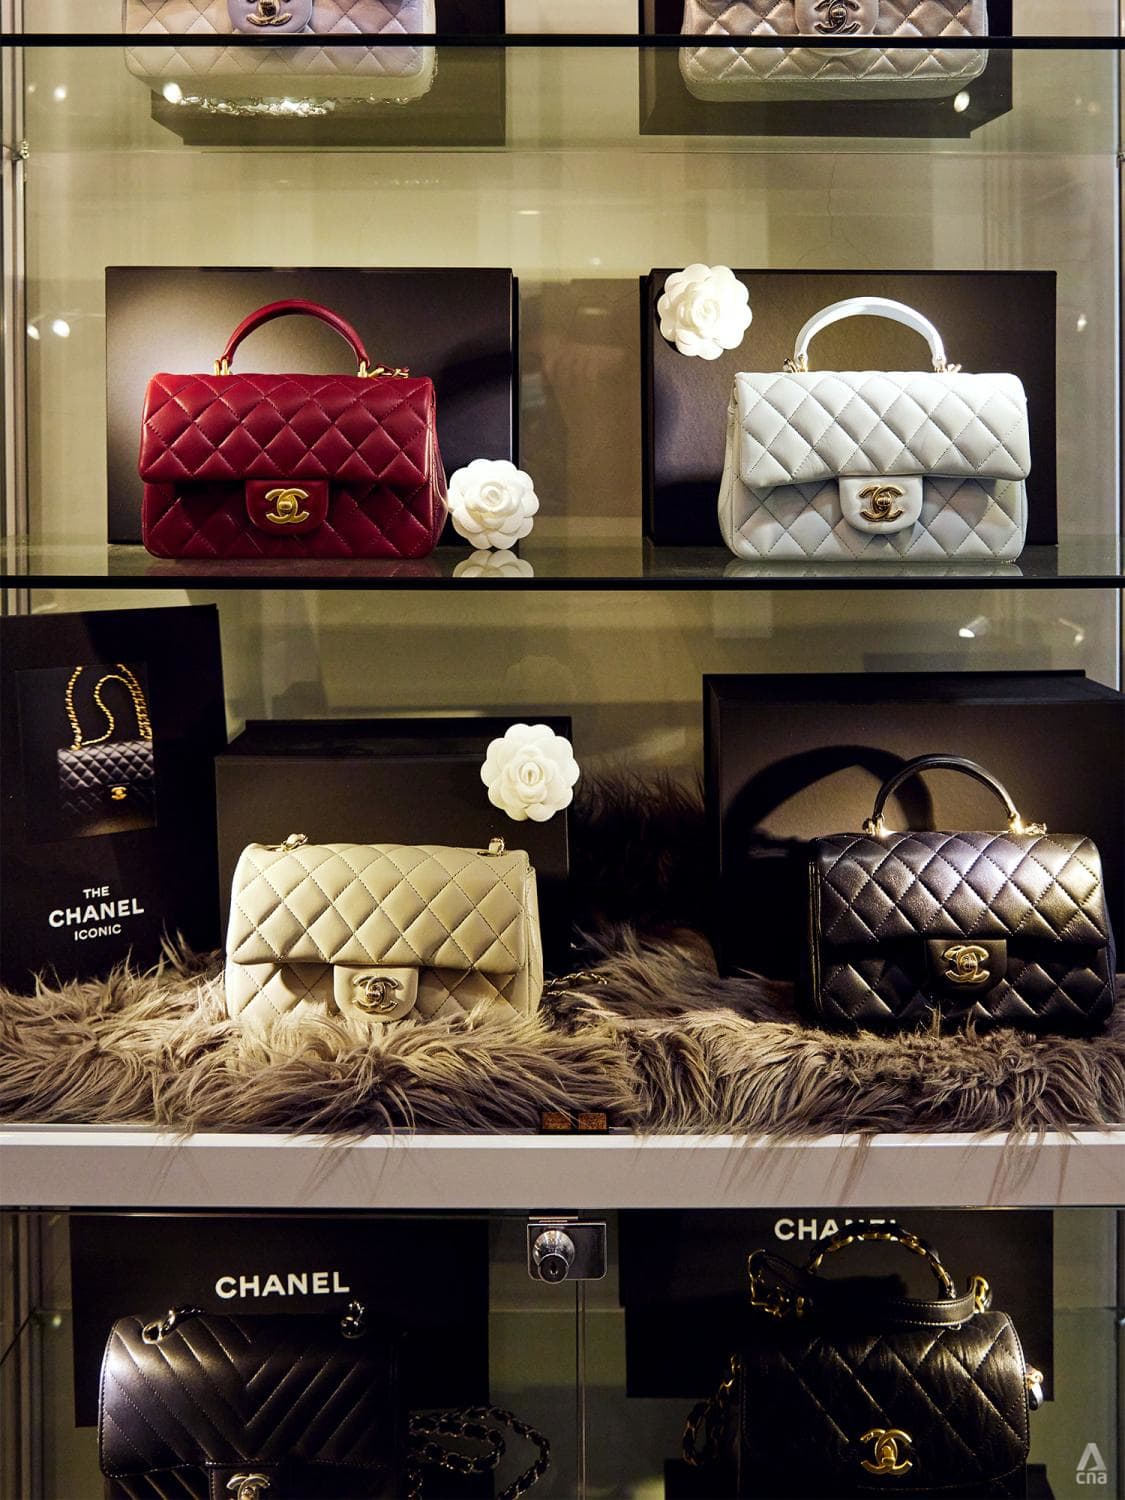 Meet the Singaporean couple collecting Chanel handbags as art pieces and  future heirlooms - CNA Luxury